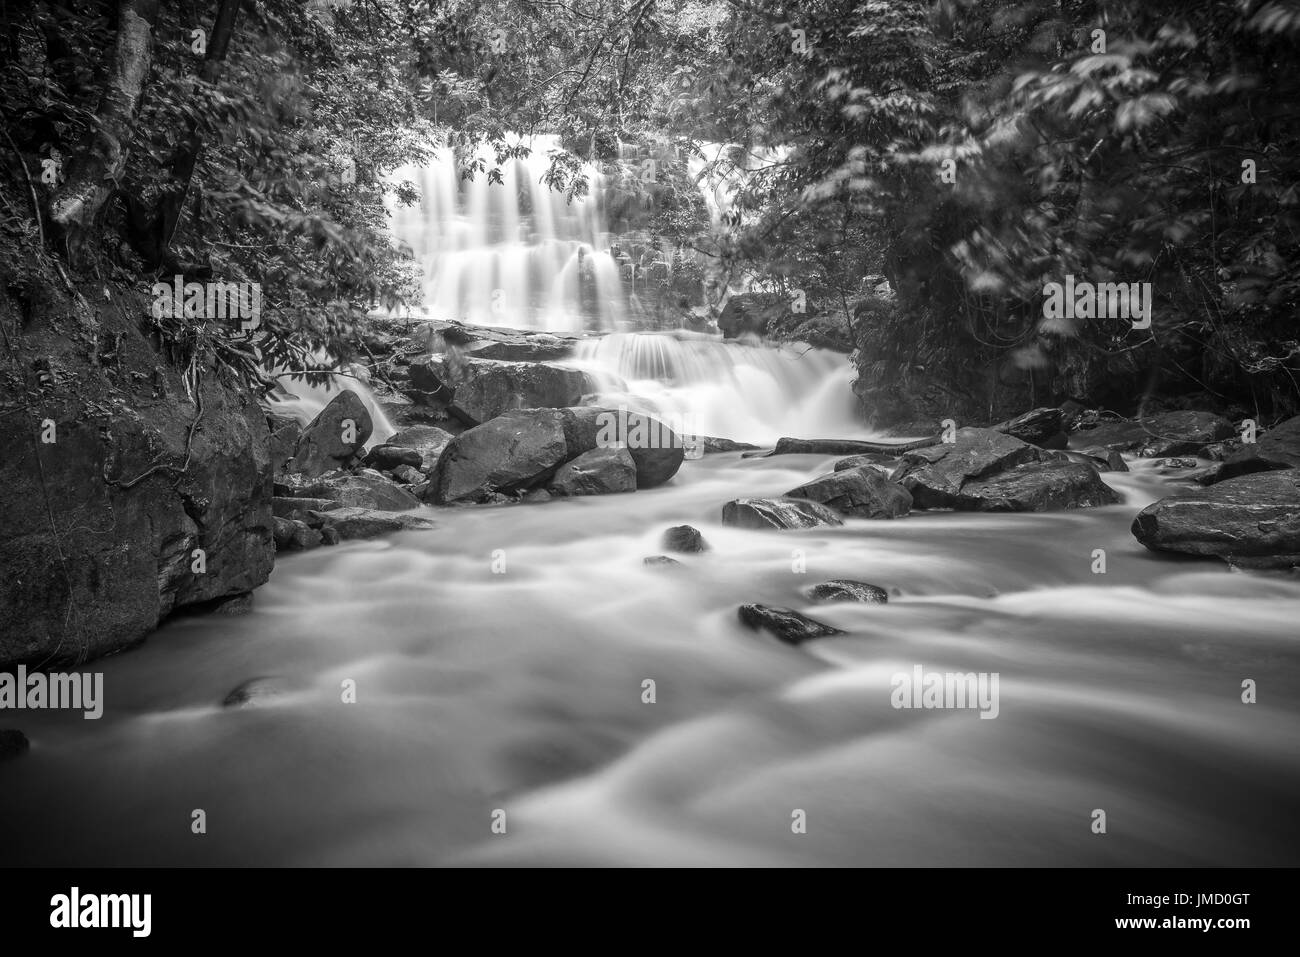 Black and white photograph of rainforest waterfall and riverside scenery taken in the national parks of Sarawak, Malaysia Stock Photo